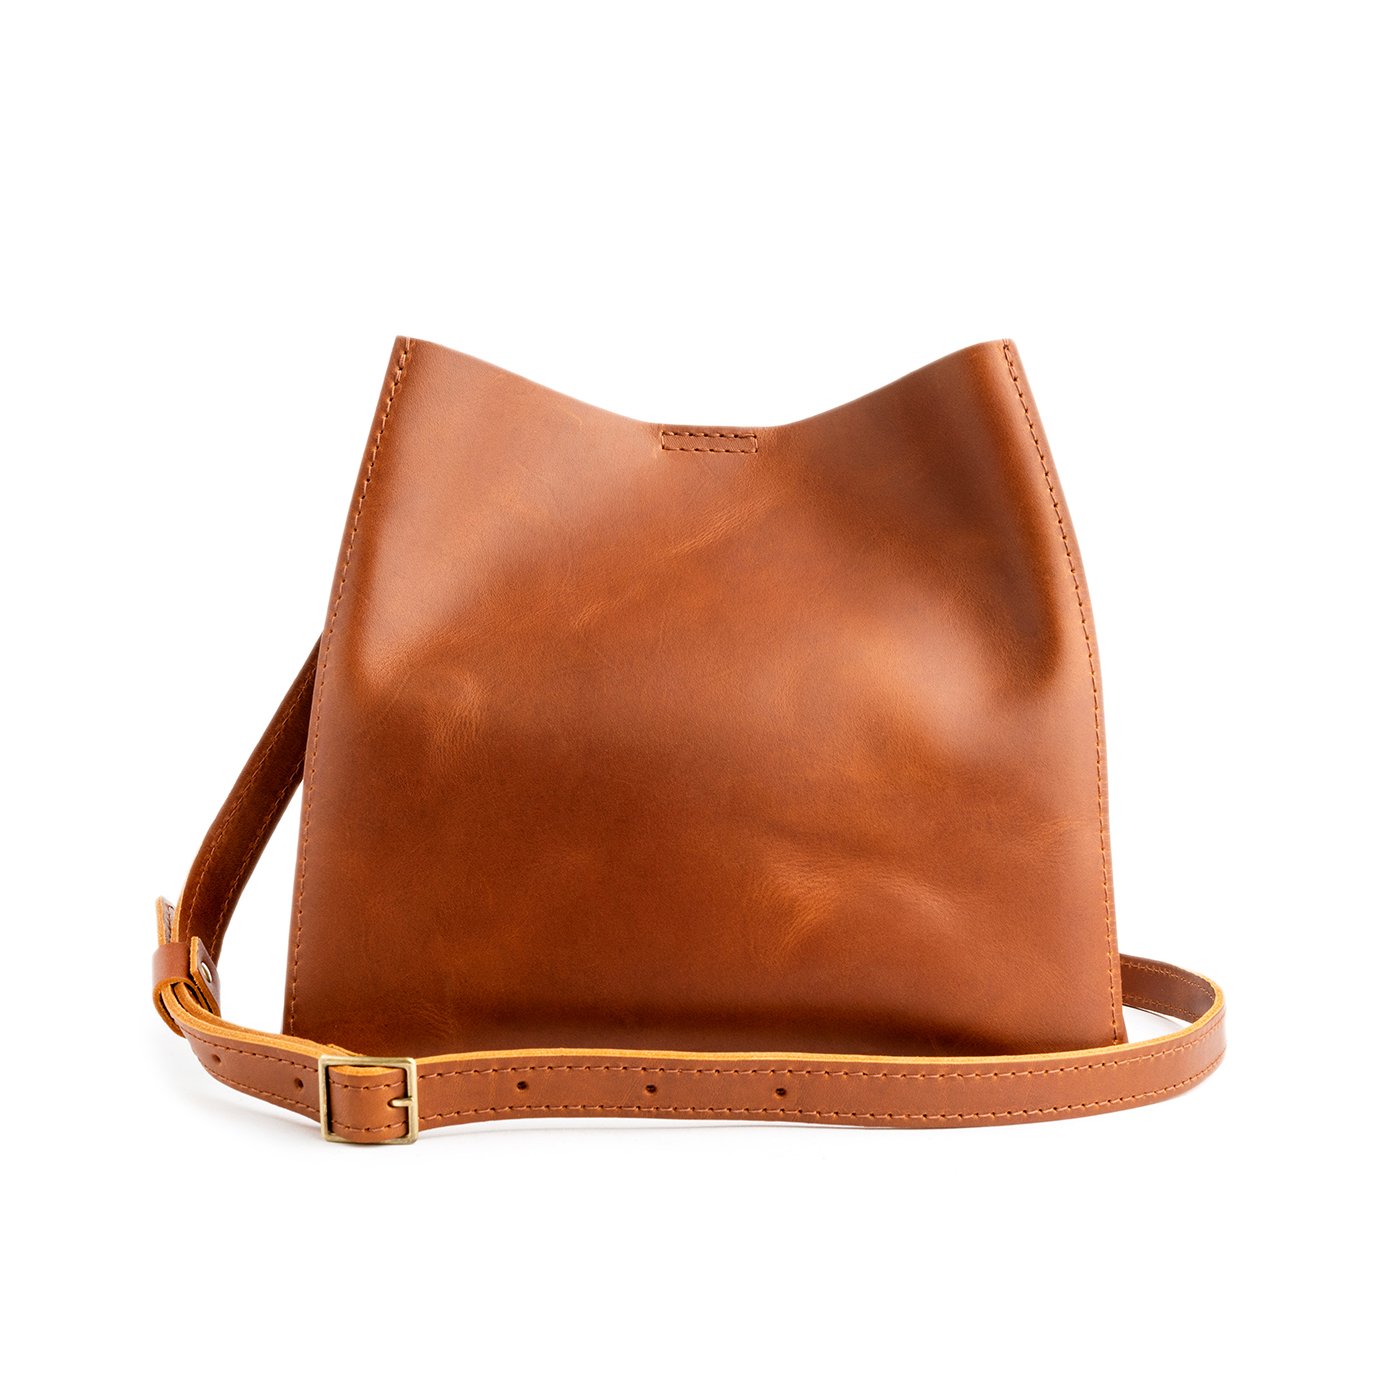 No. 8 Pouch - Handmade Leather Pouch